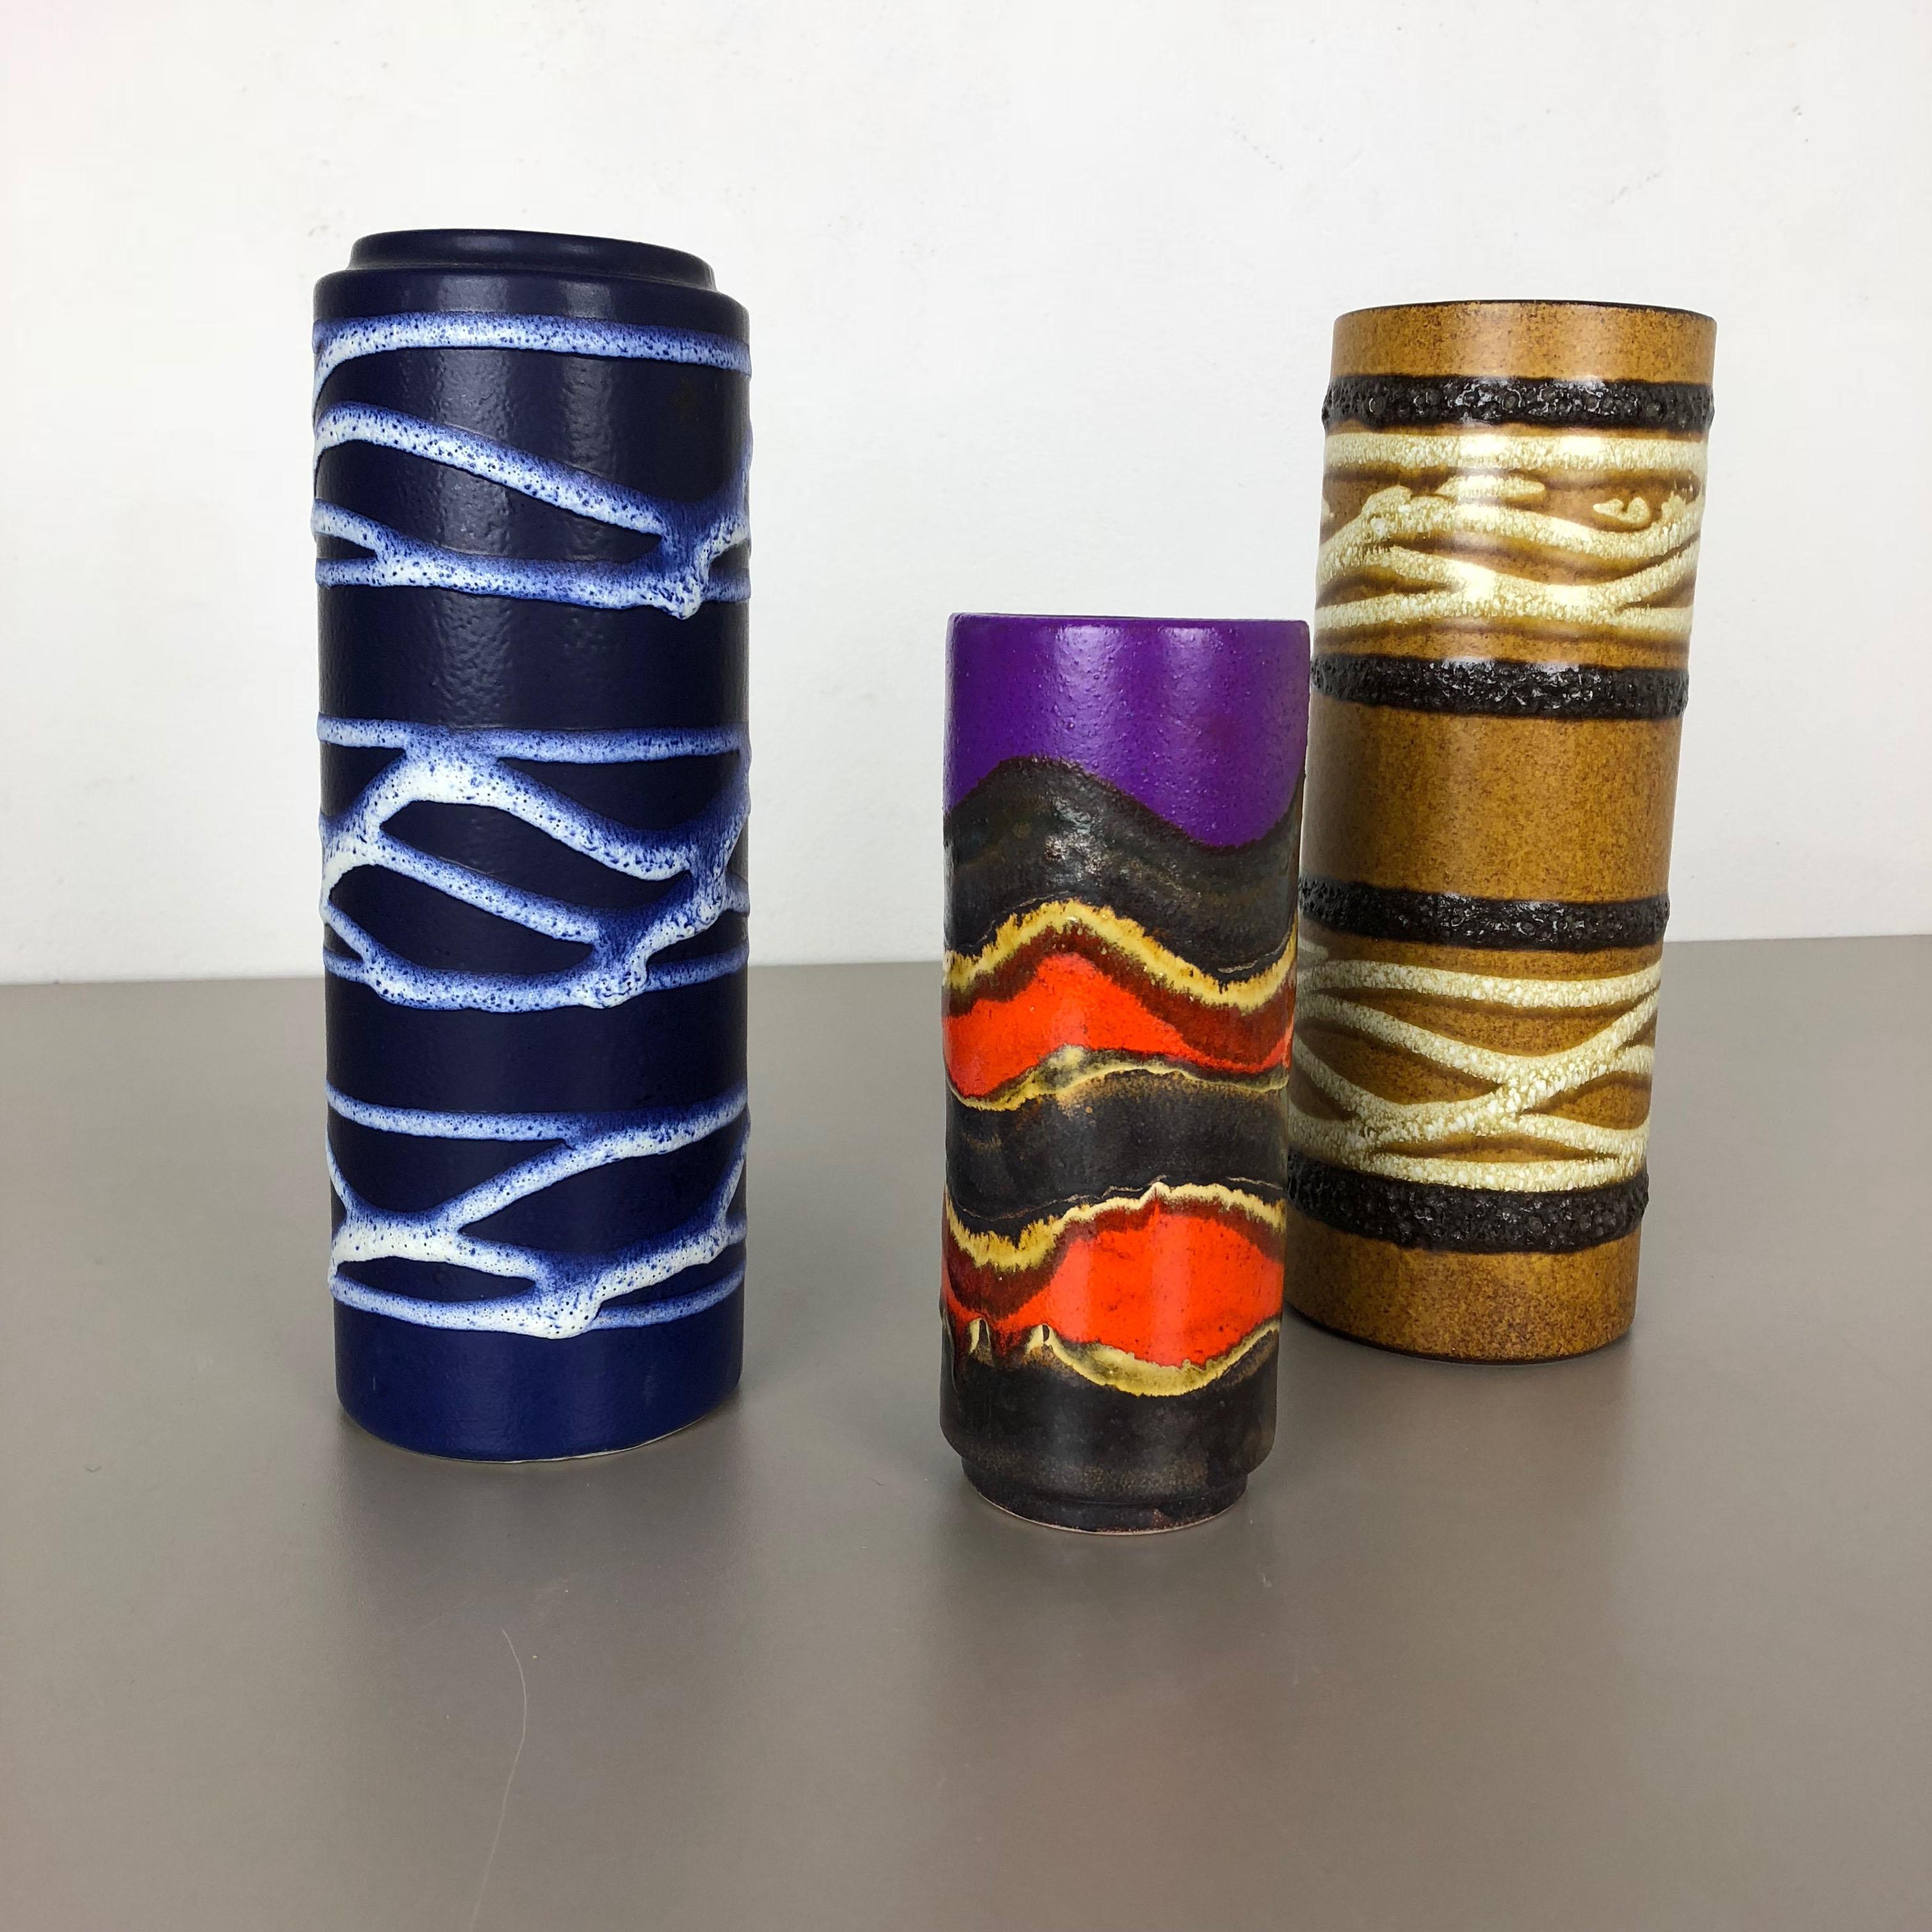 Article:

Set of three fat lava art vases


Producer:

Scheurich, Germany



Decade:

1970s




These original vintage vases was produced in the 1970s in Germany. It is made of ceramic pottery in fat lava optic. Super rare in this